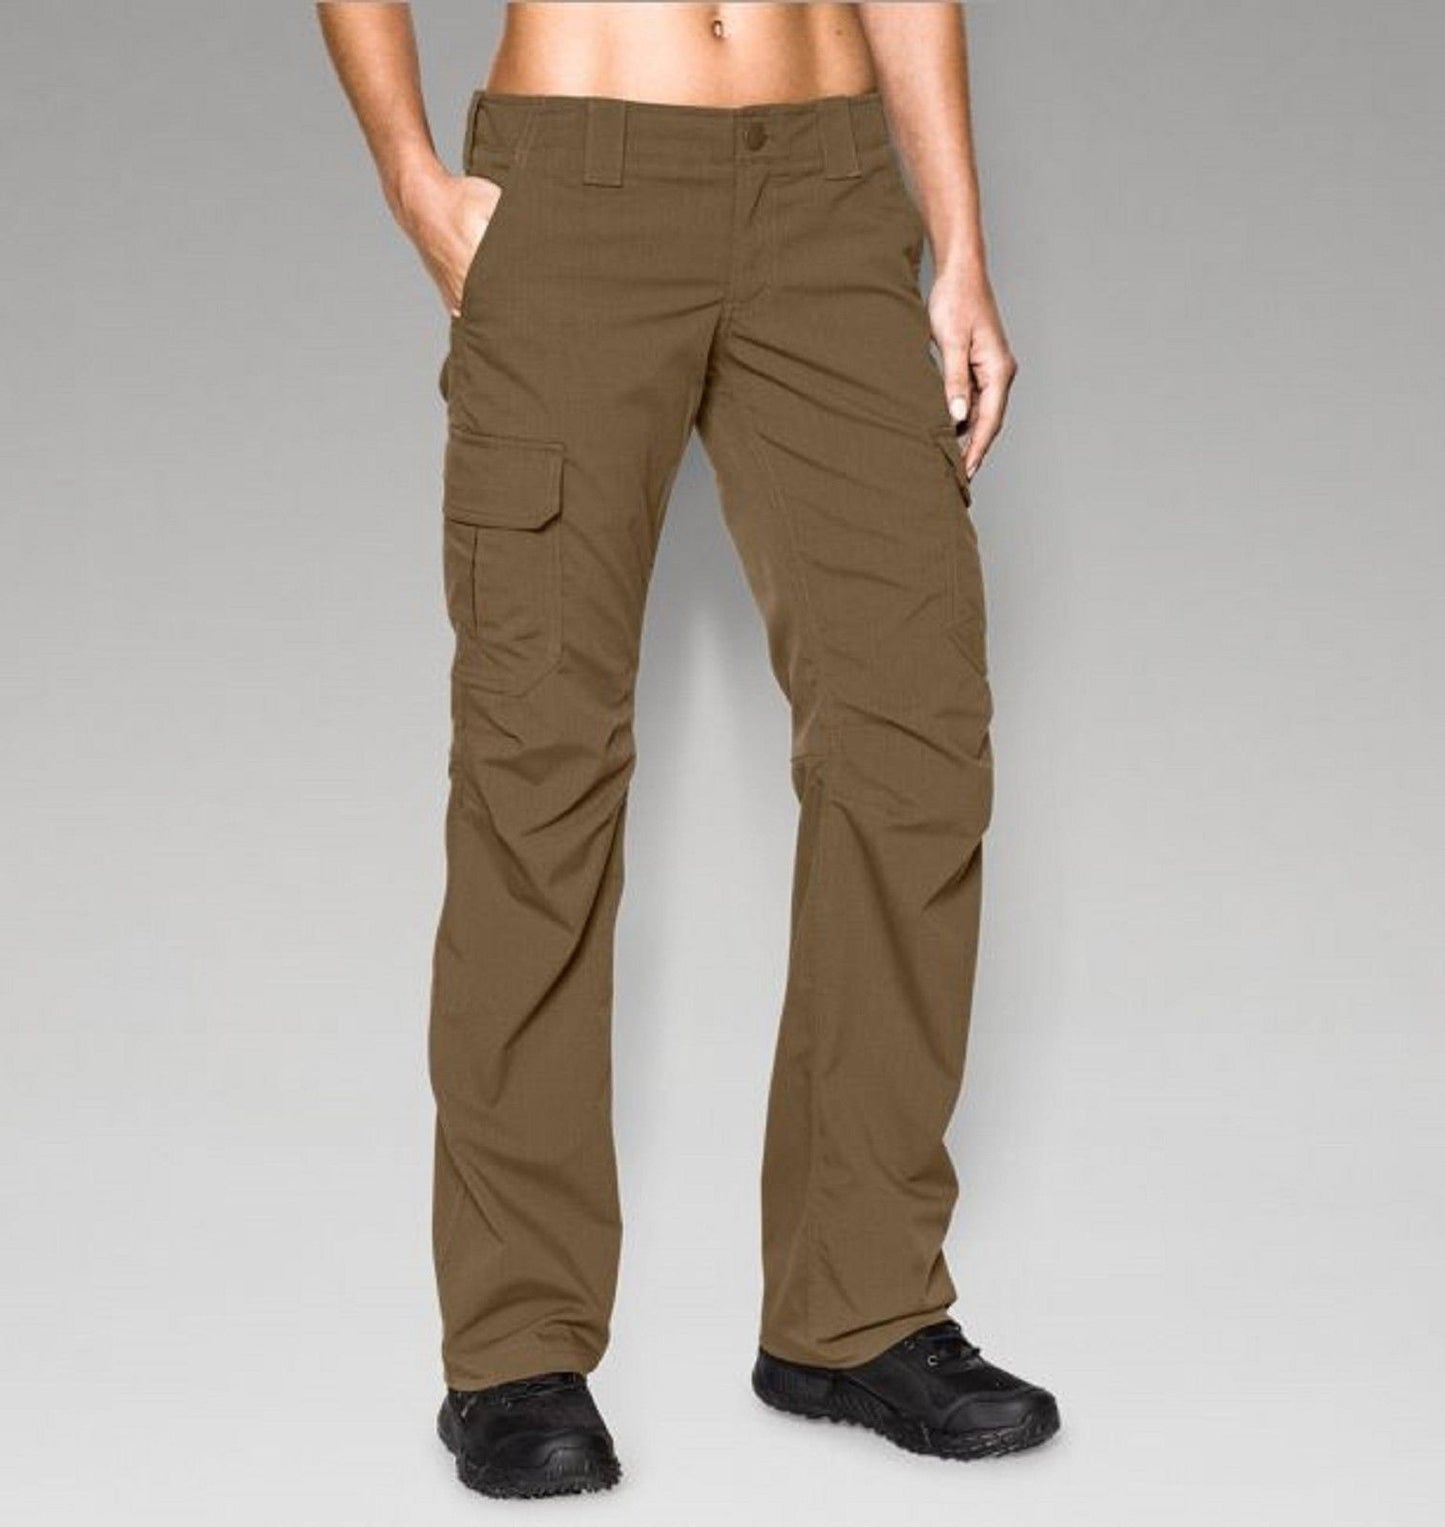 Under Armour Tactical Patrol Pants for Ladies